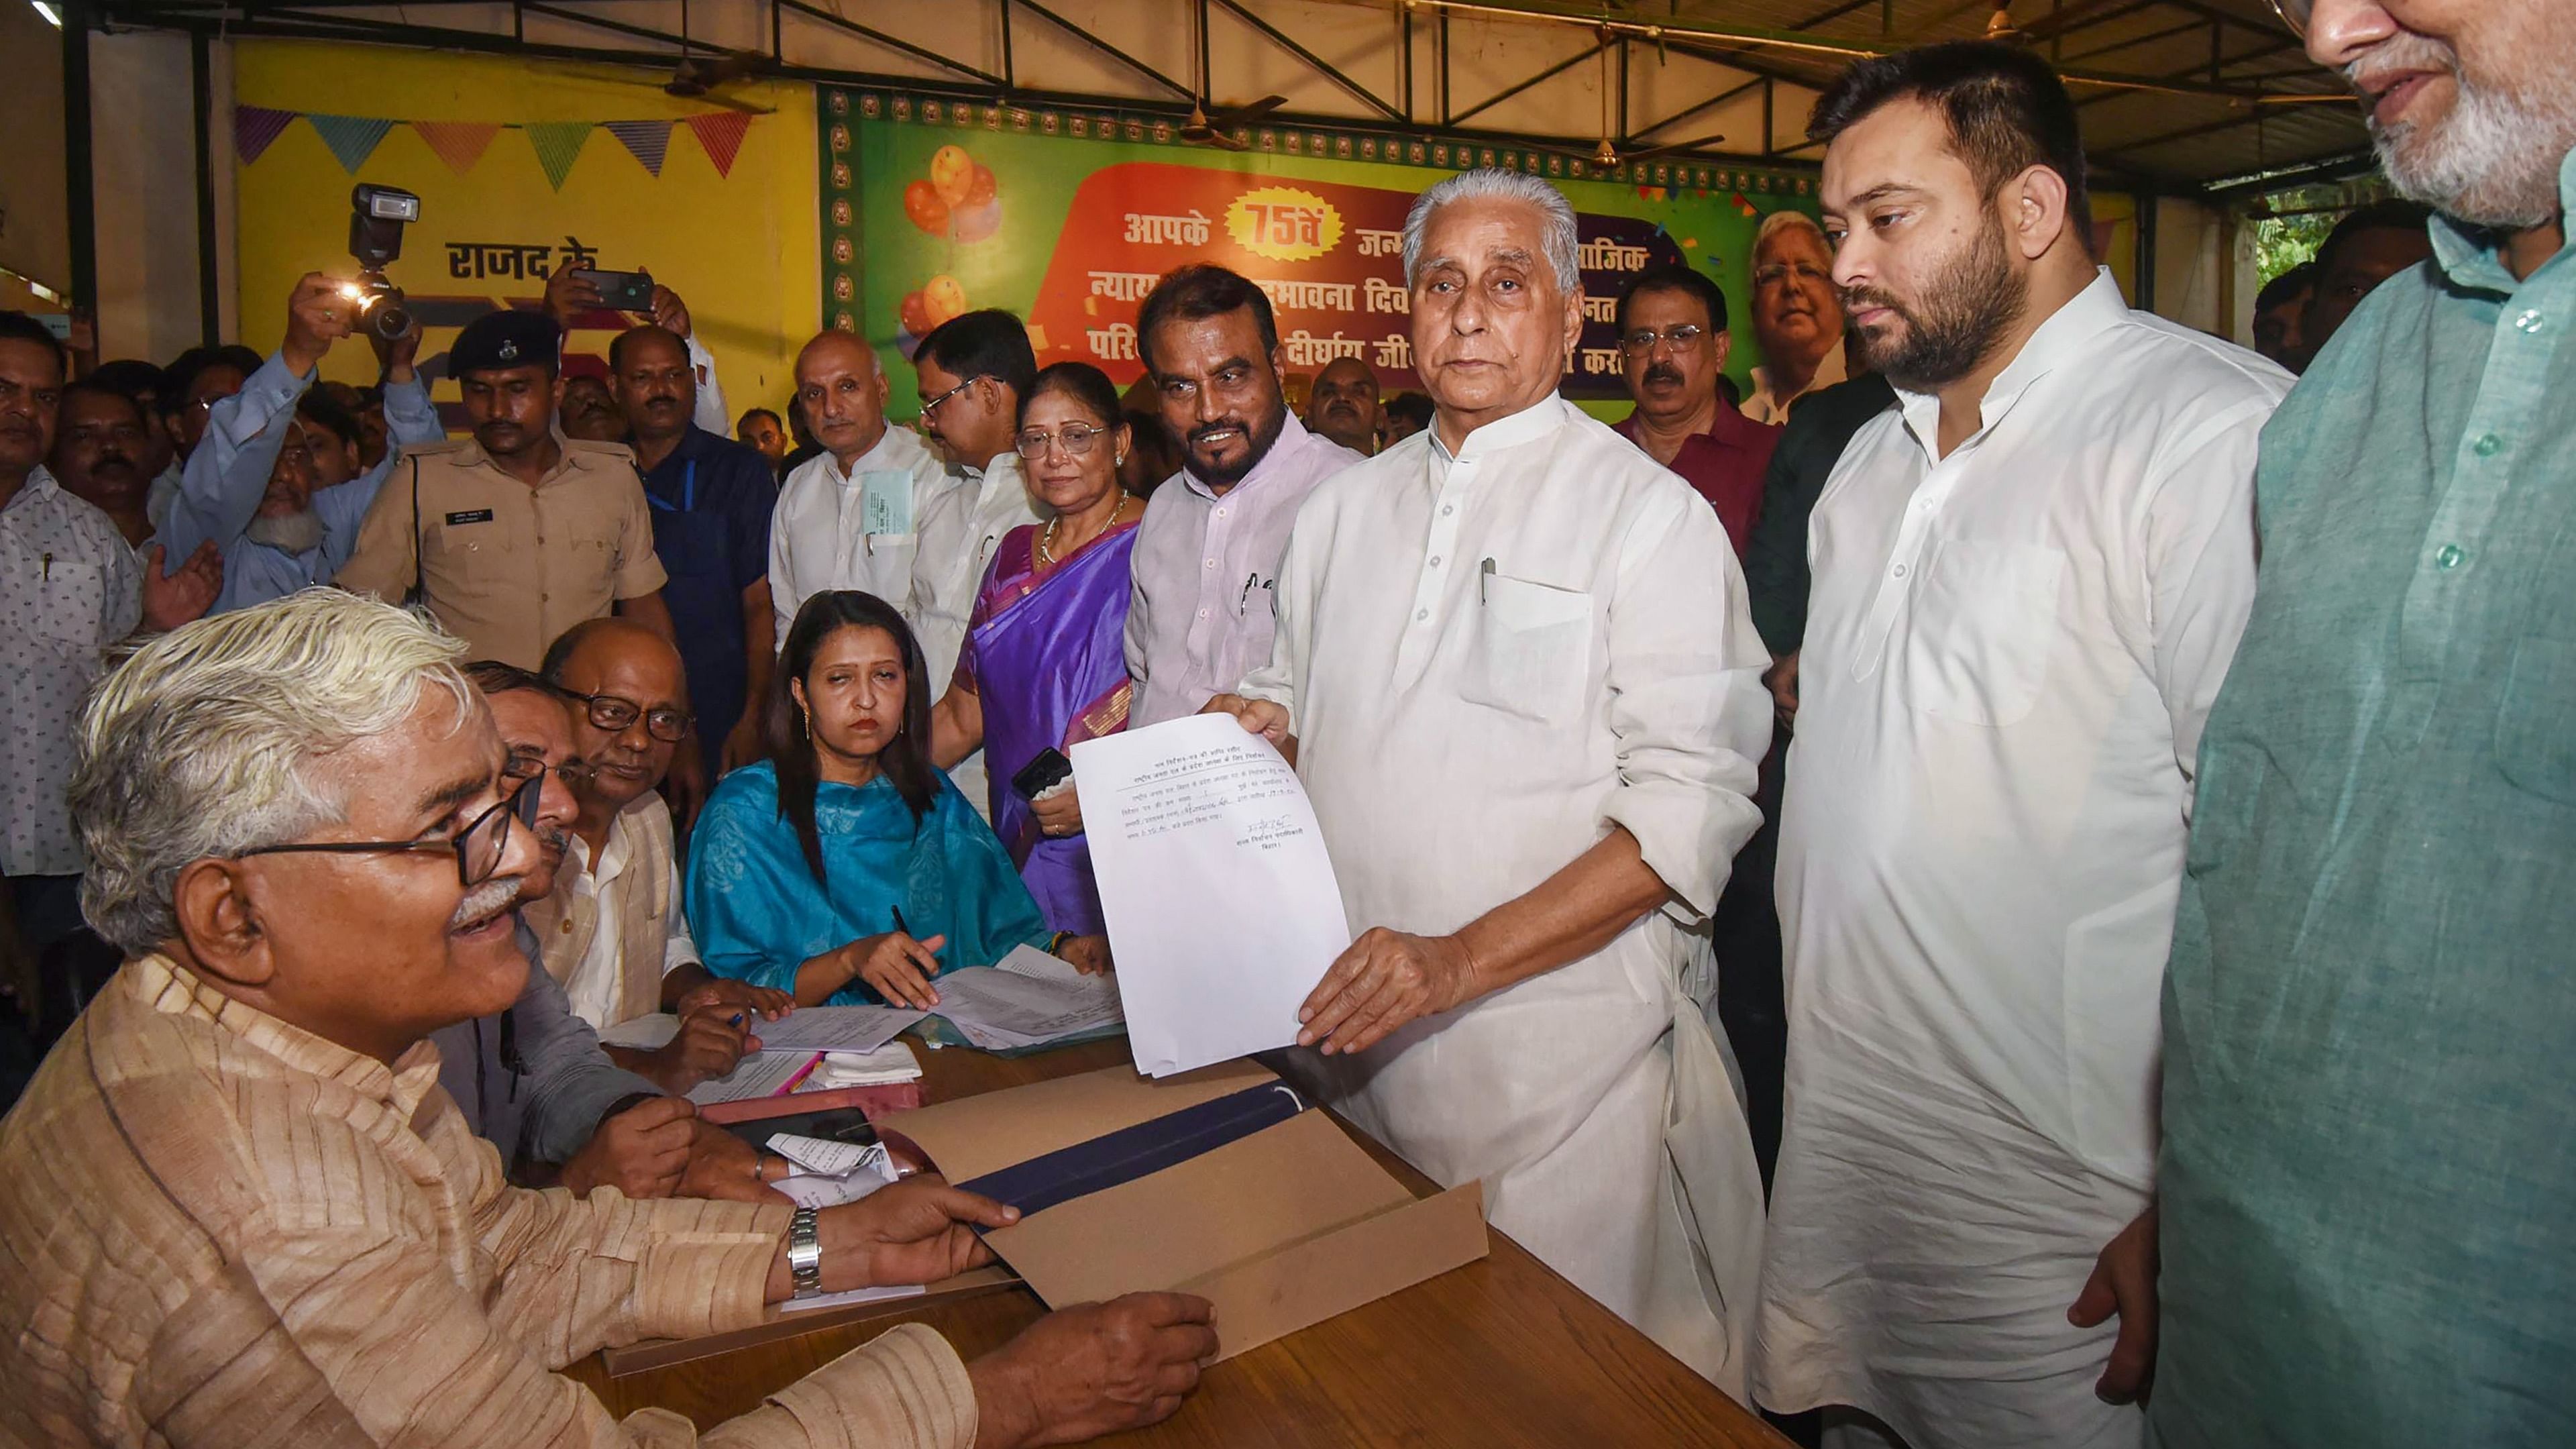 Jagdanand Singh, considered close to party chief Lalu Prasad, was the only one to file his nomination for the post. Credit: PTI Photo